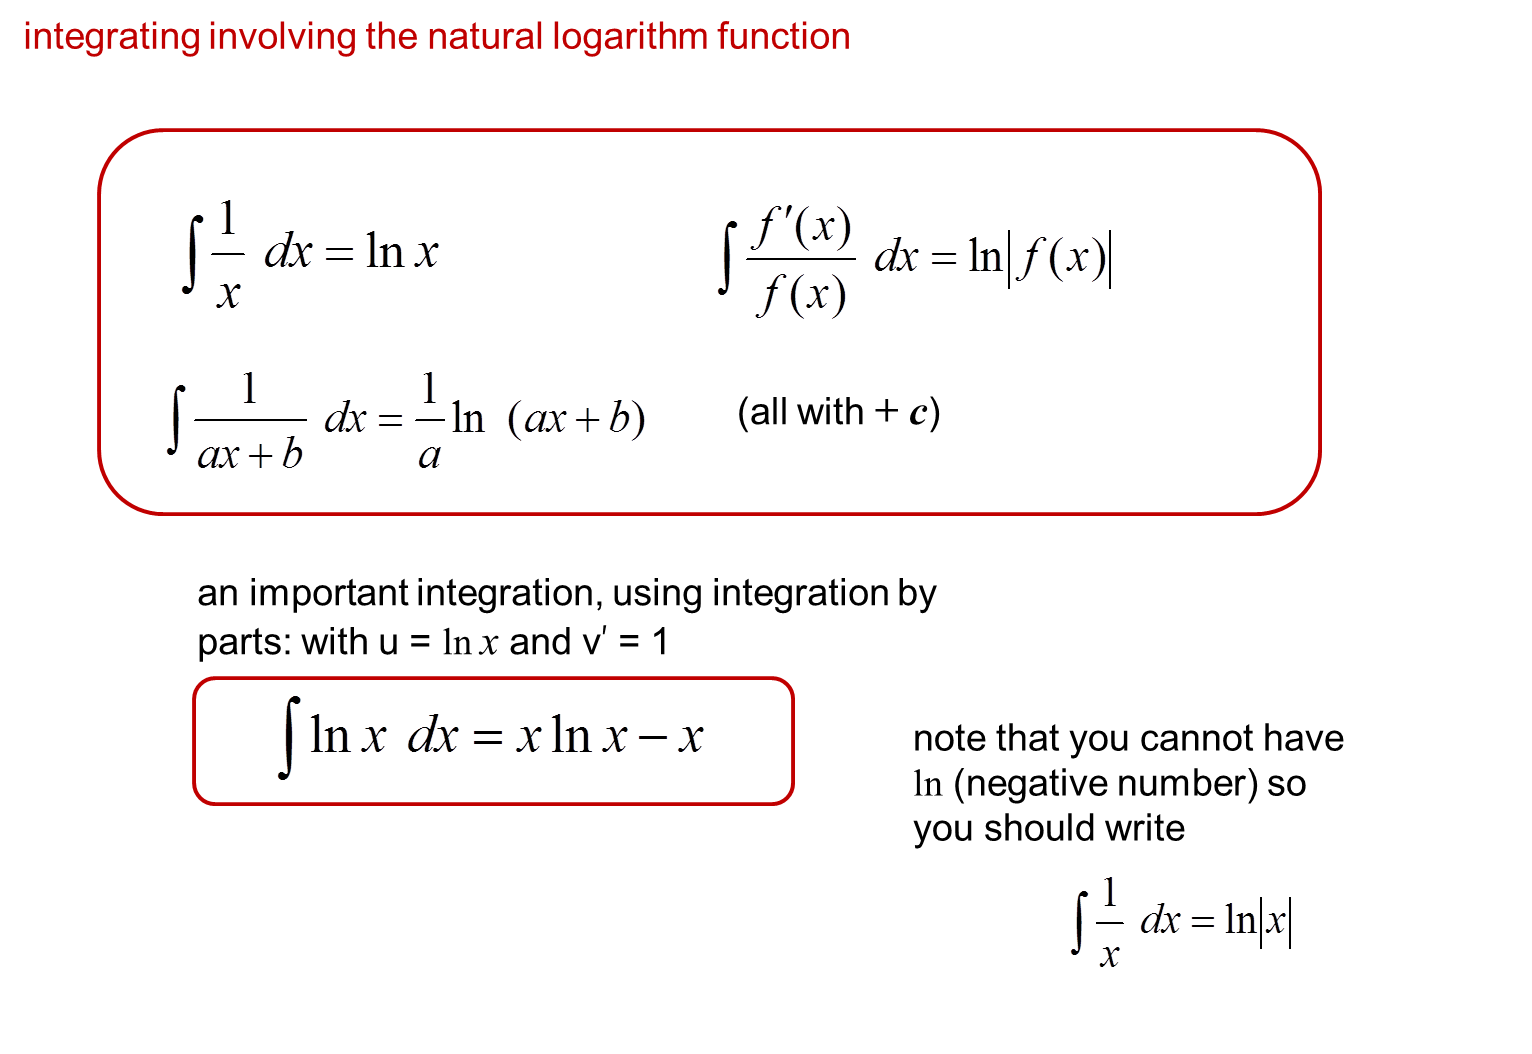 Core Pure 3 Notes Integrals Involving The Natural Logarithm Function